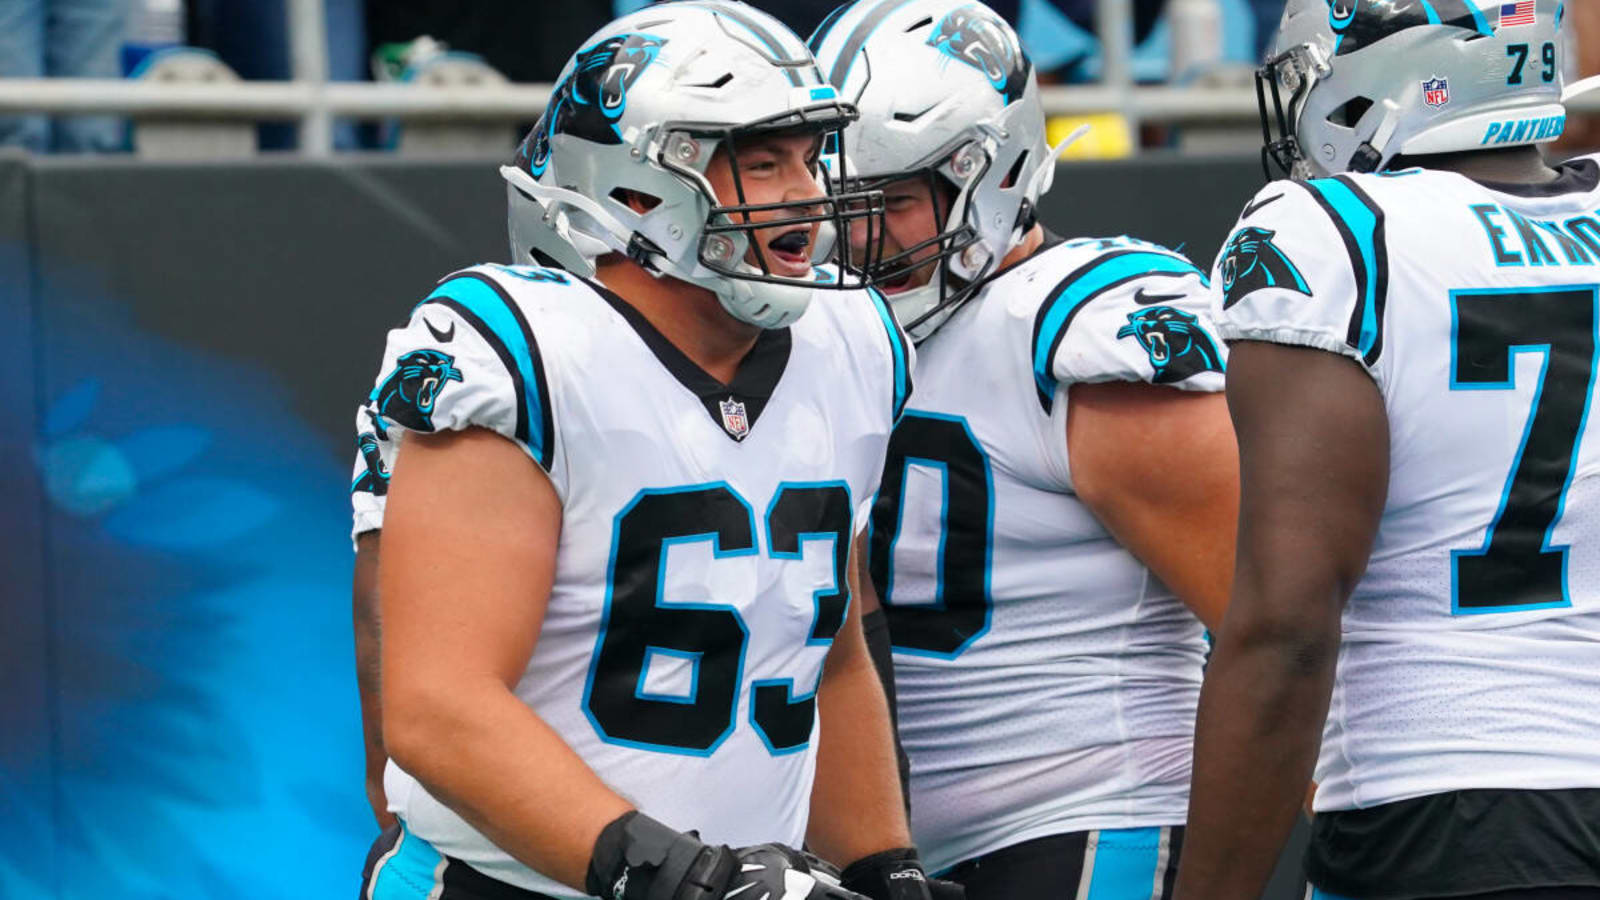 Panthers OL Austin Corbett indicates he could return to game action soon